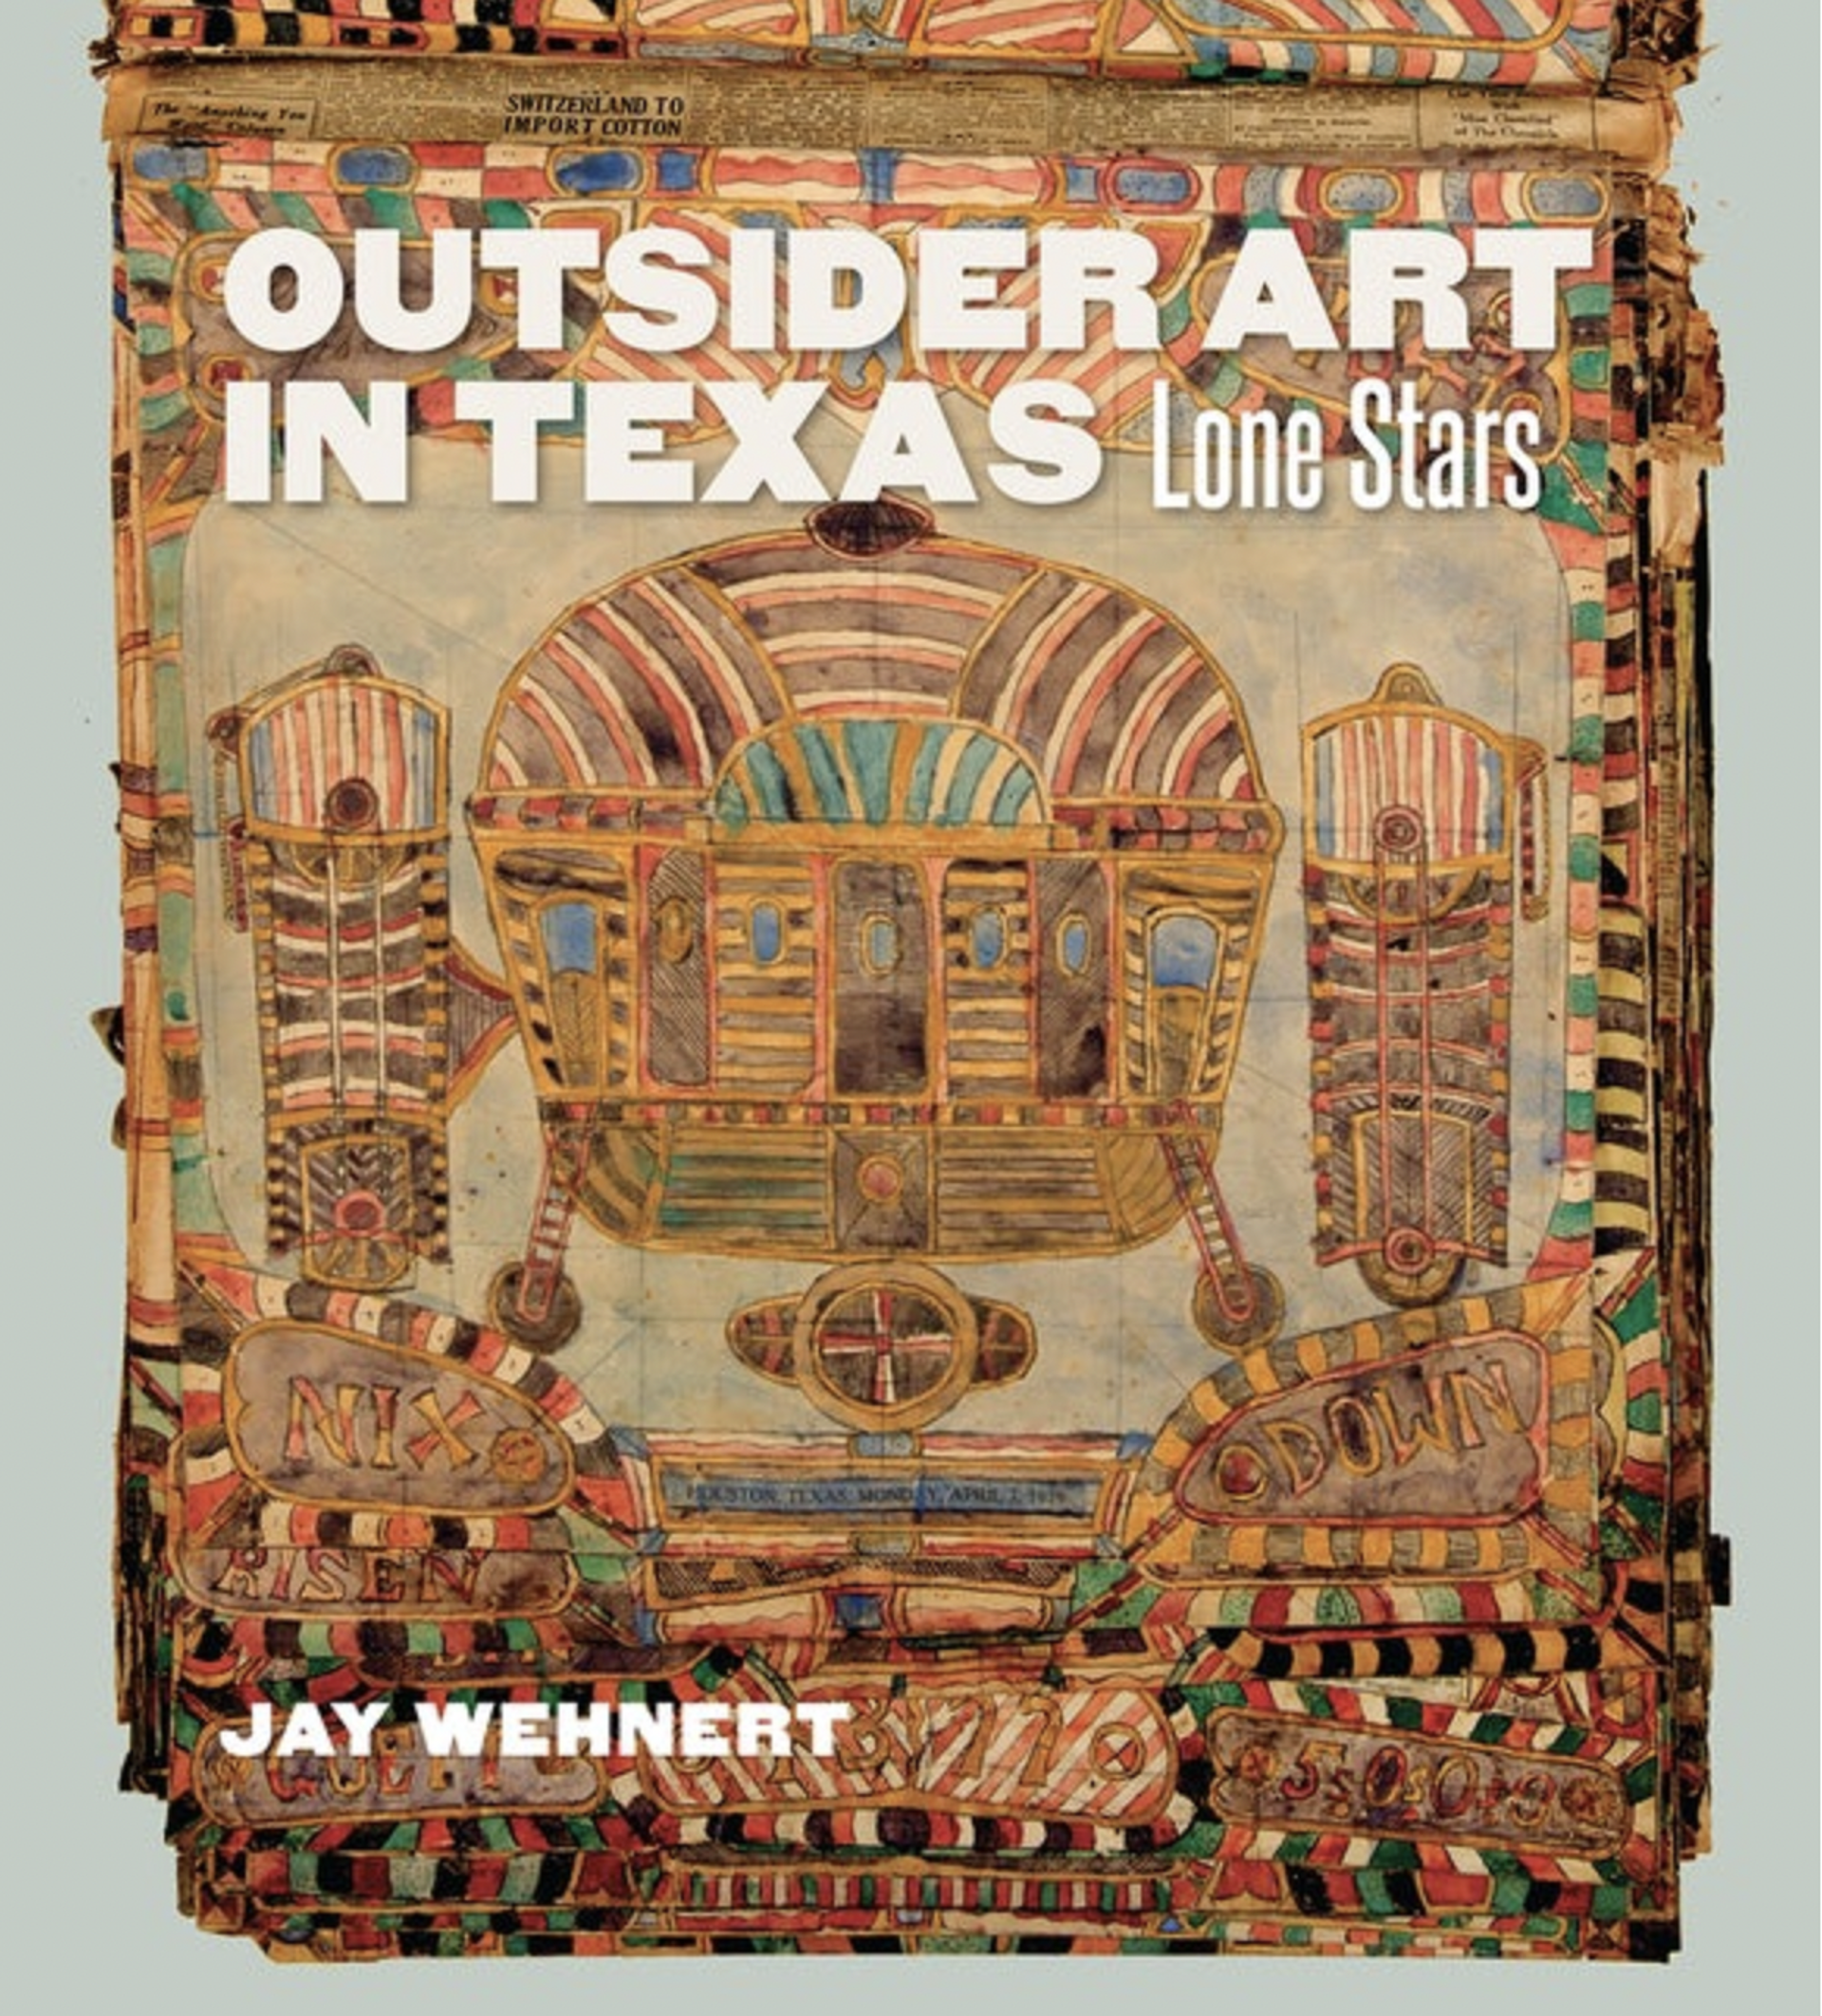 Outsider Art in Texas: Lone Stars  by Jay Wehnert by Publications